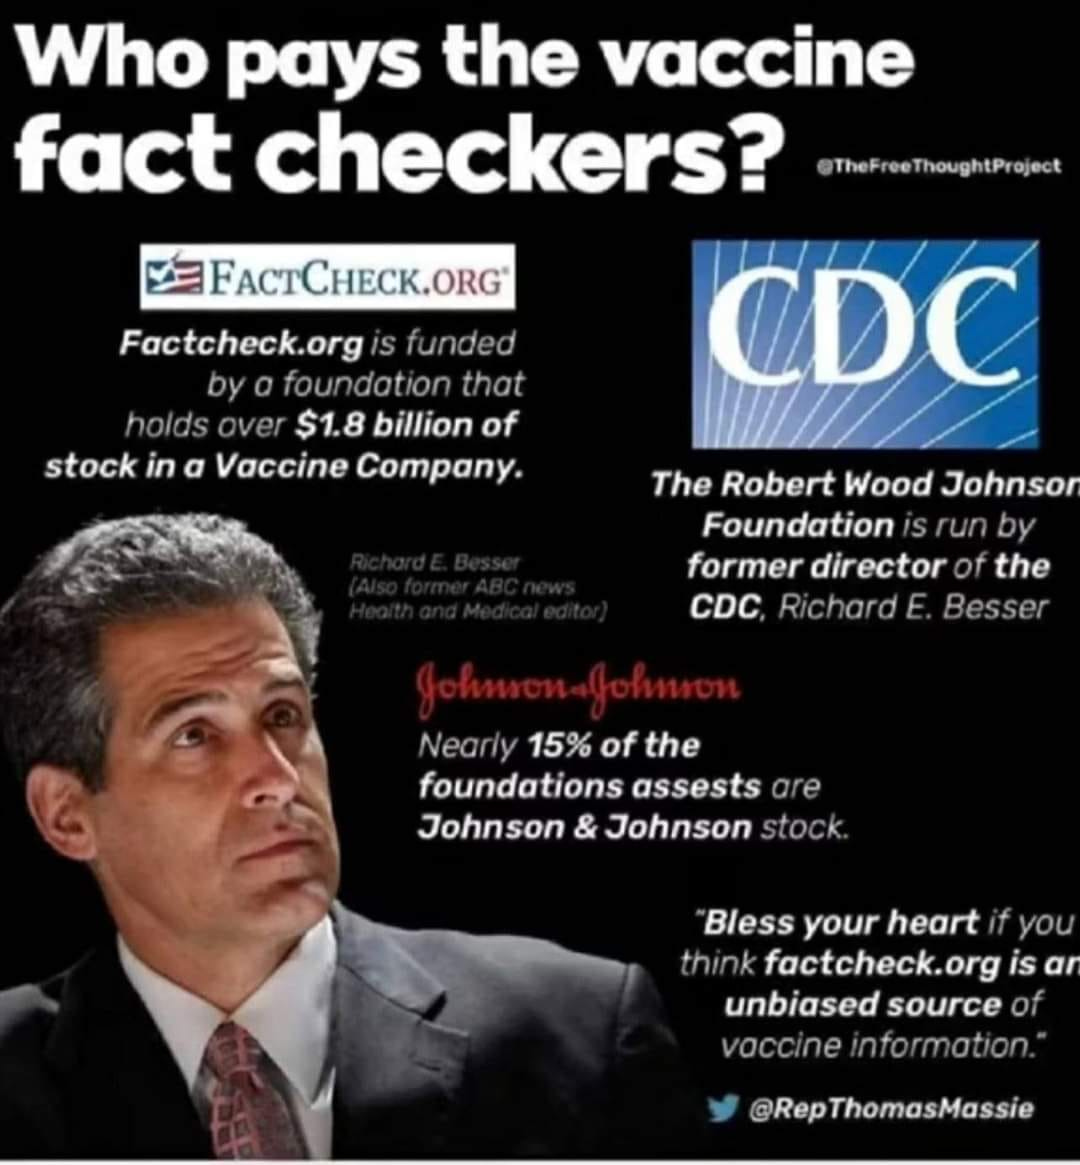 May be an image of 1 person and text that says "Who pays the vaccine fact checkers? CDC @TheFreeThoughtProject FACTCHECK.ORG Factcheck.org funded by foundation that holdsove over $1.8 billion of stock in a Vaccine Company. The Robert Wood Johnsor Foundation isrun by former director of the CDC, RichardE Besser Nearly 15% of the foundations assests are Johnson & Johnson stock Bless your heart you think factcheck.org is ar unbiased source vaccine information. @RepThomasMassie"